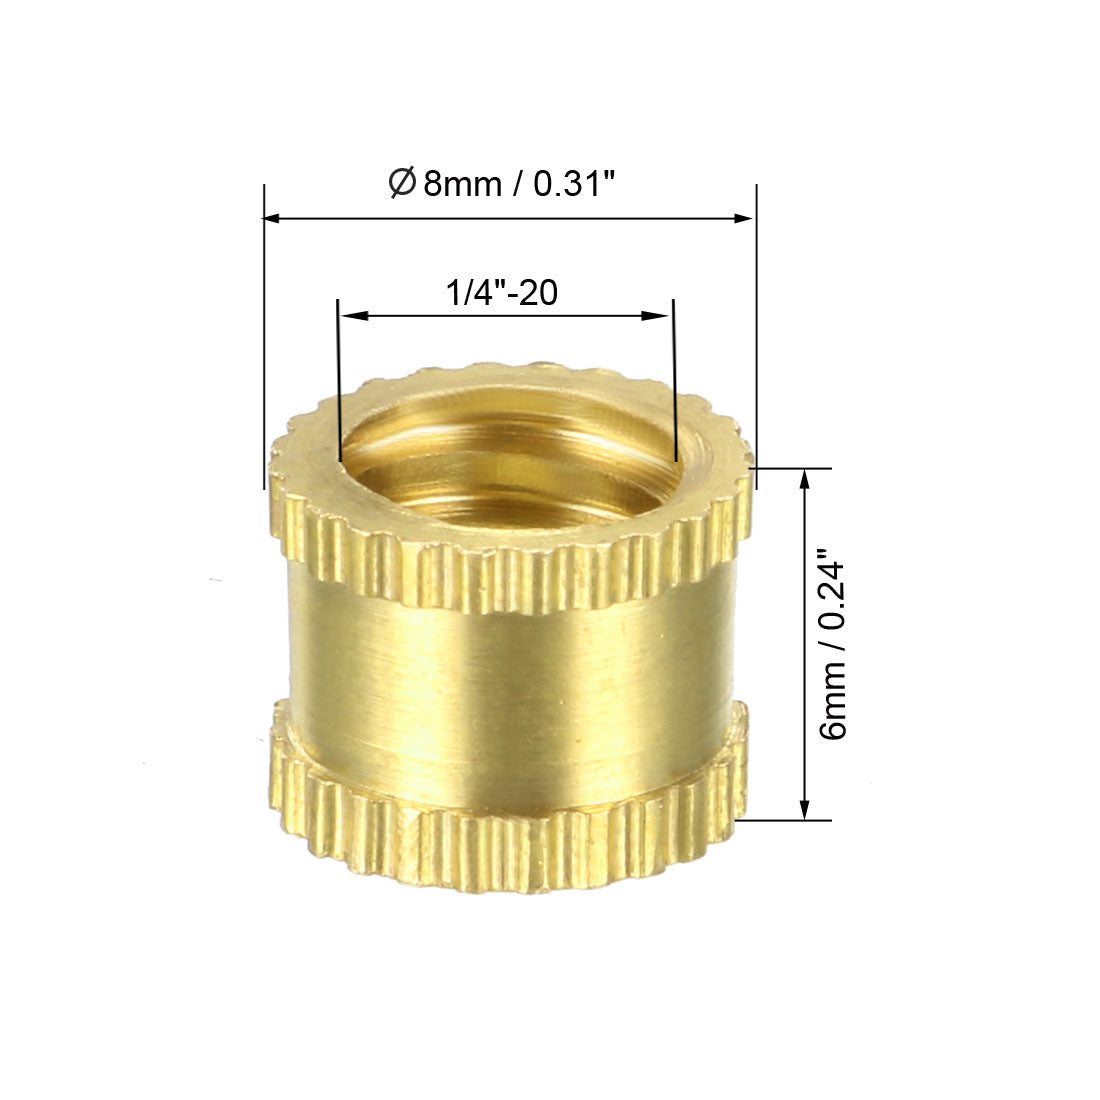 uxcell Uxcell 1/4"-20 Female Brass Knurled Threaded Insert Embedment Nut for 3D Printer, 25Pcs